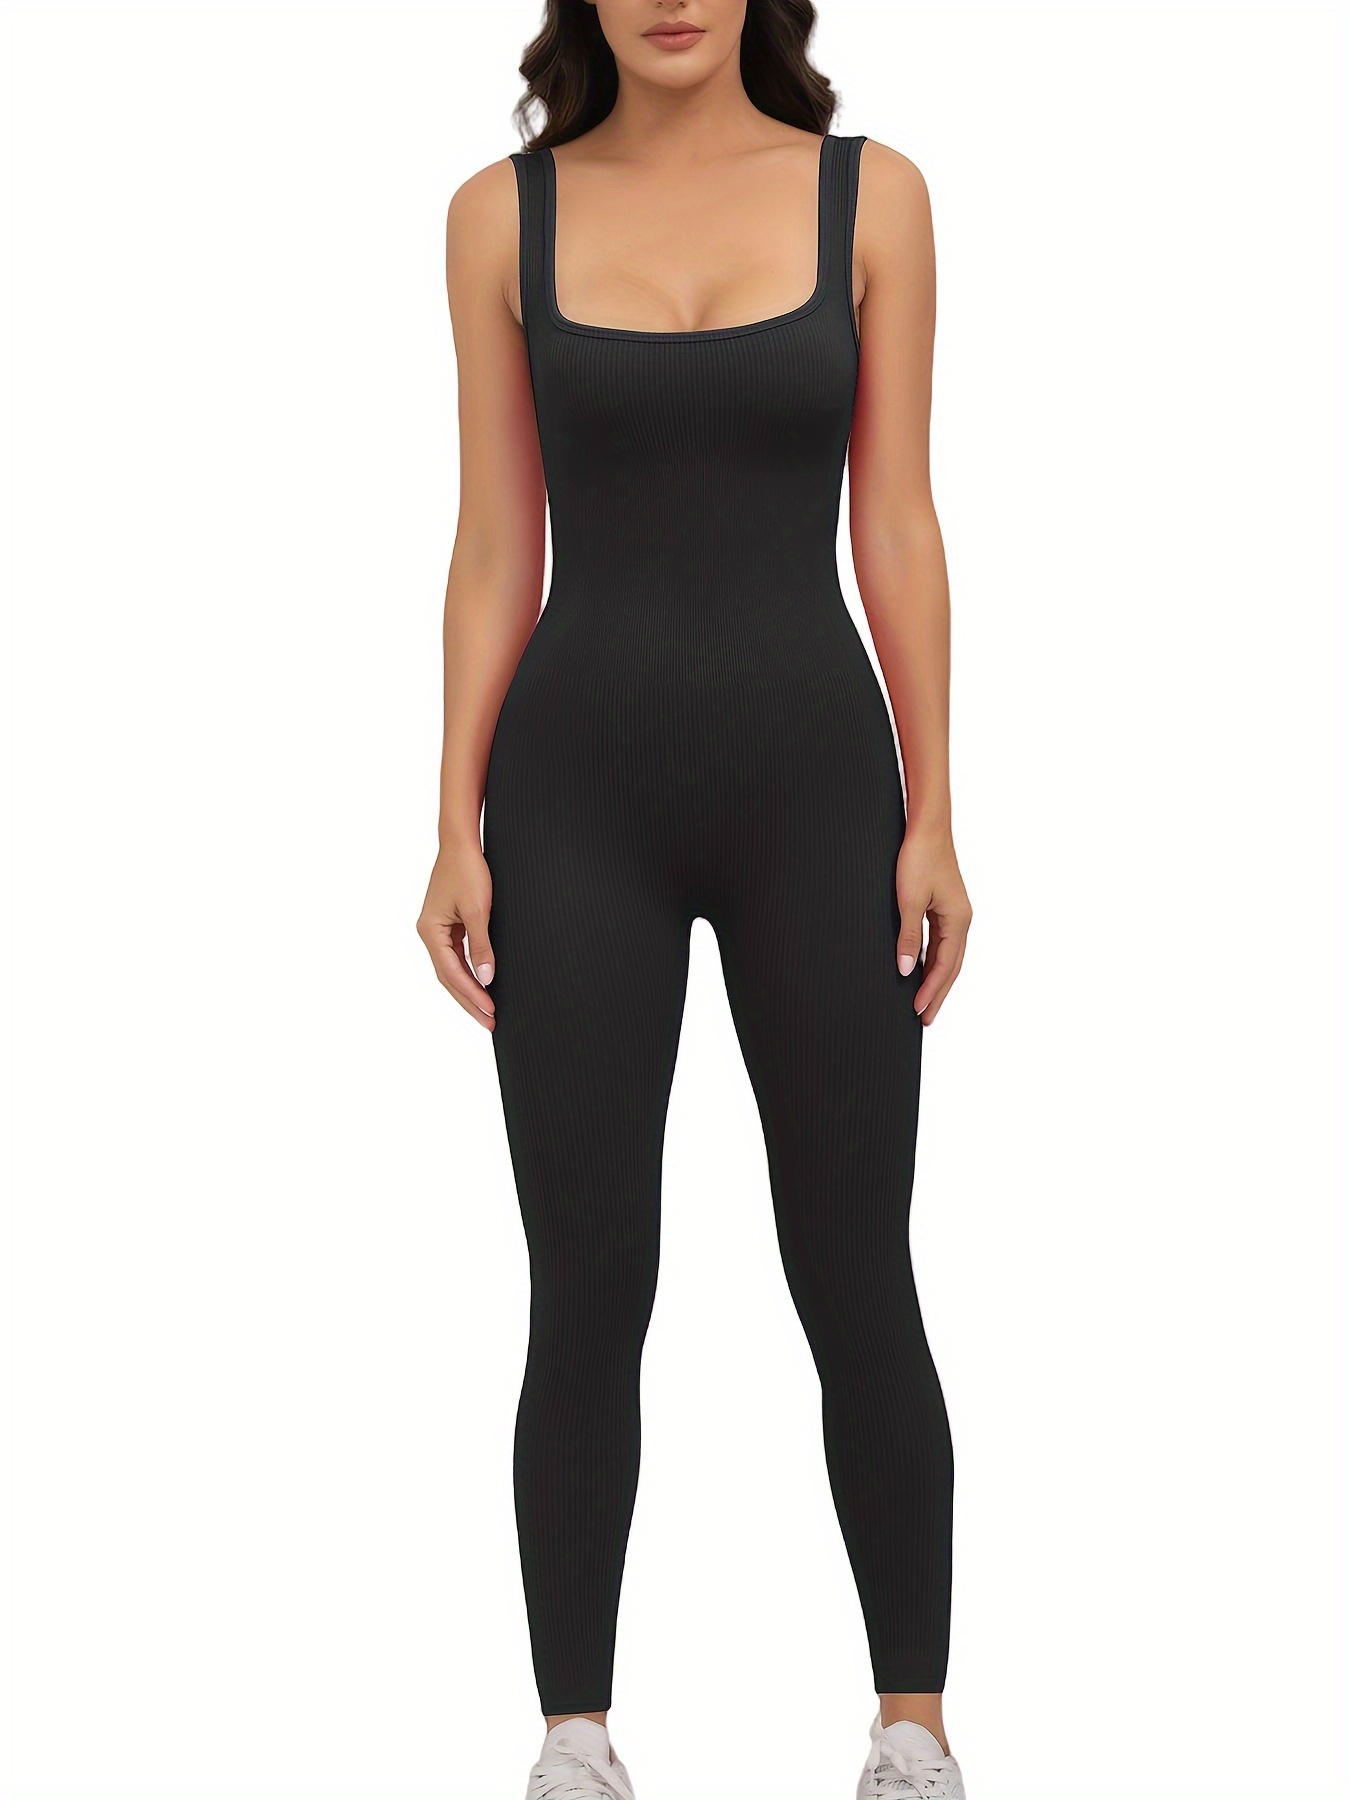  OQQ Women's 3 Piece Bodysuits Sexy Ribbed Strappy